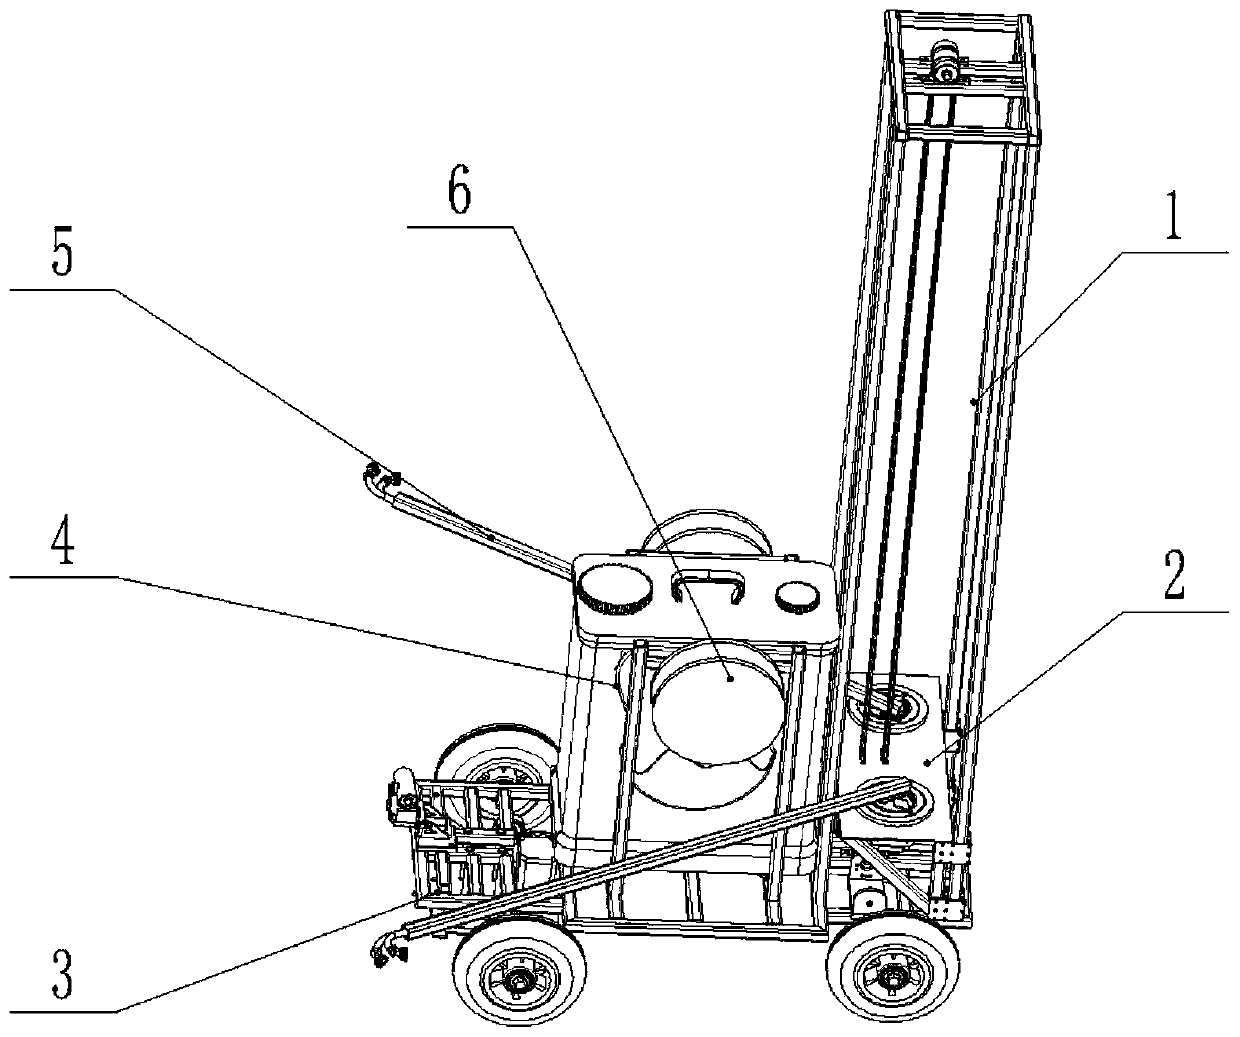 Self-propelled pesticide spraying device